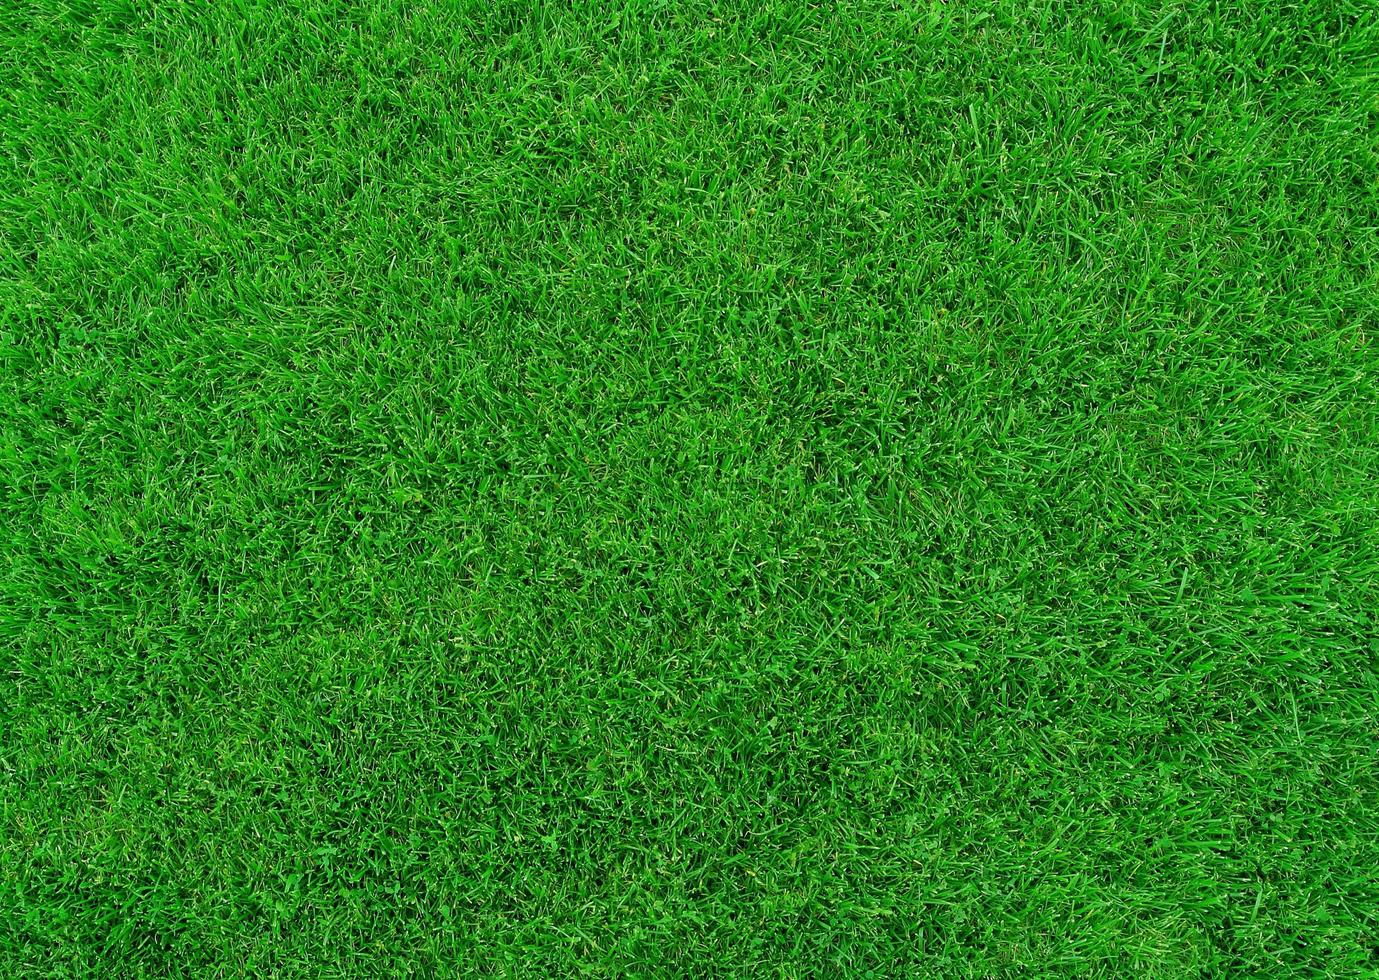 Green grass texture can be use as background photo